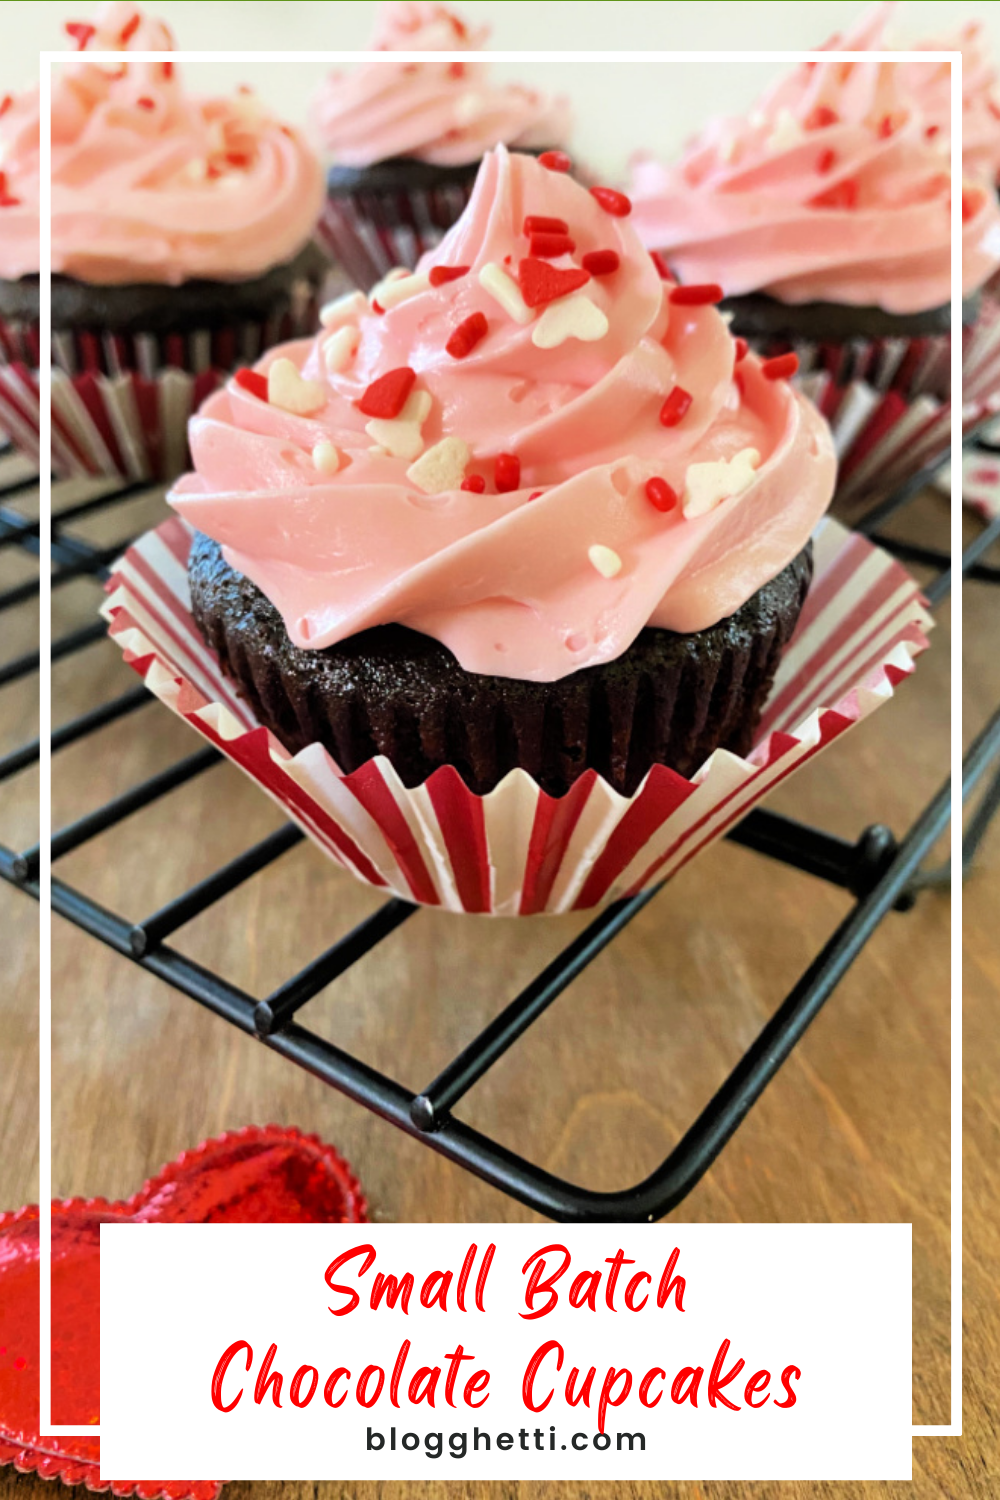 https://blogghetti.com/wp-content/uploads/2022/02/small-batch-homemade-chocolate-cupcakes-image-with-text-overlay.png